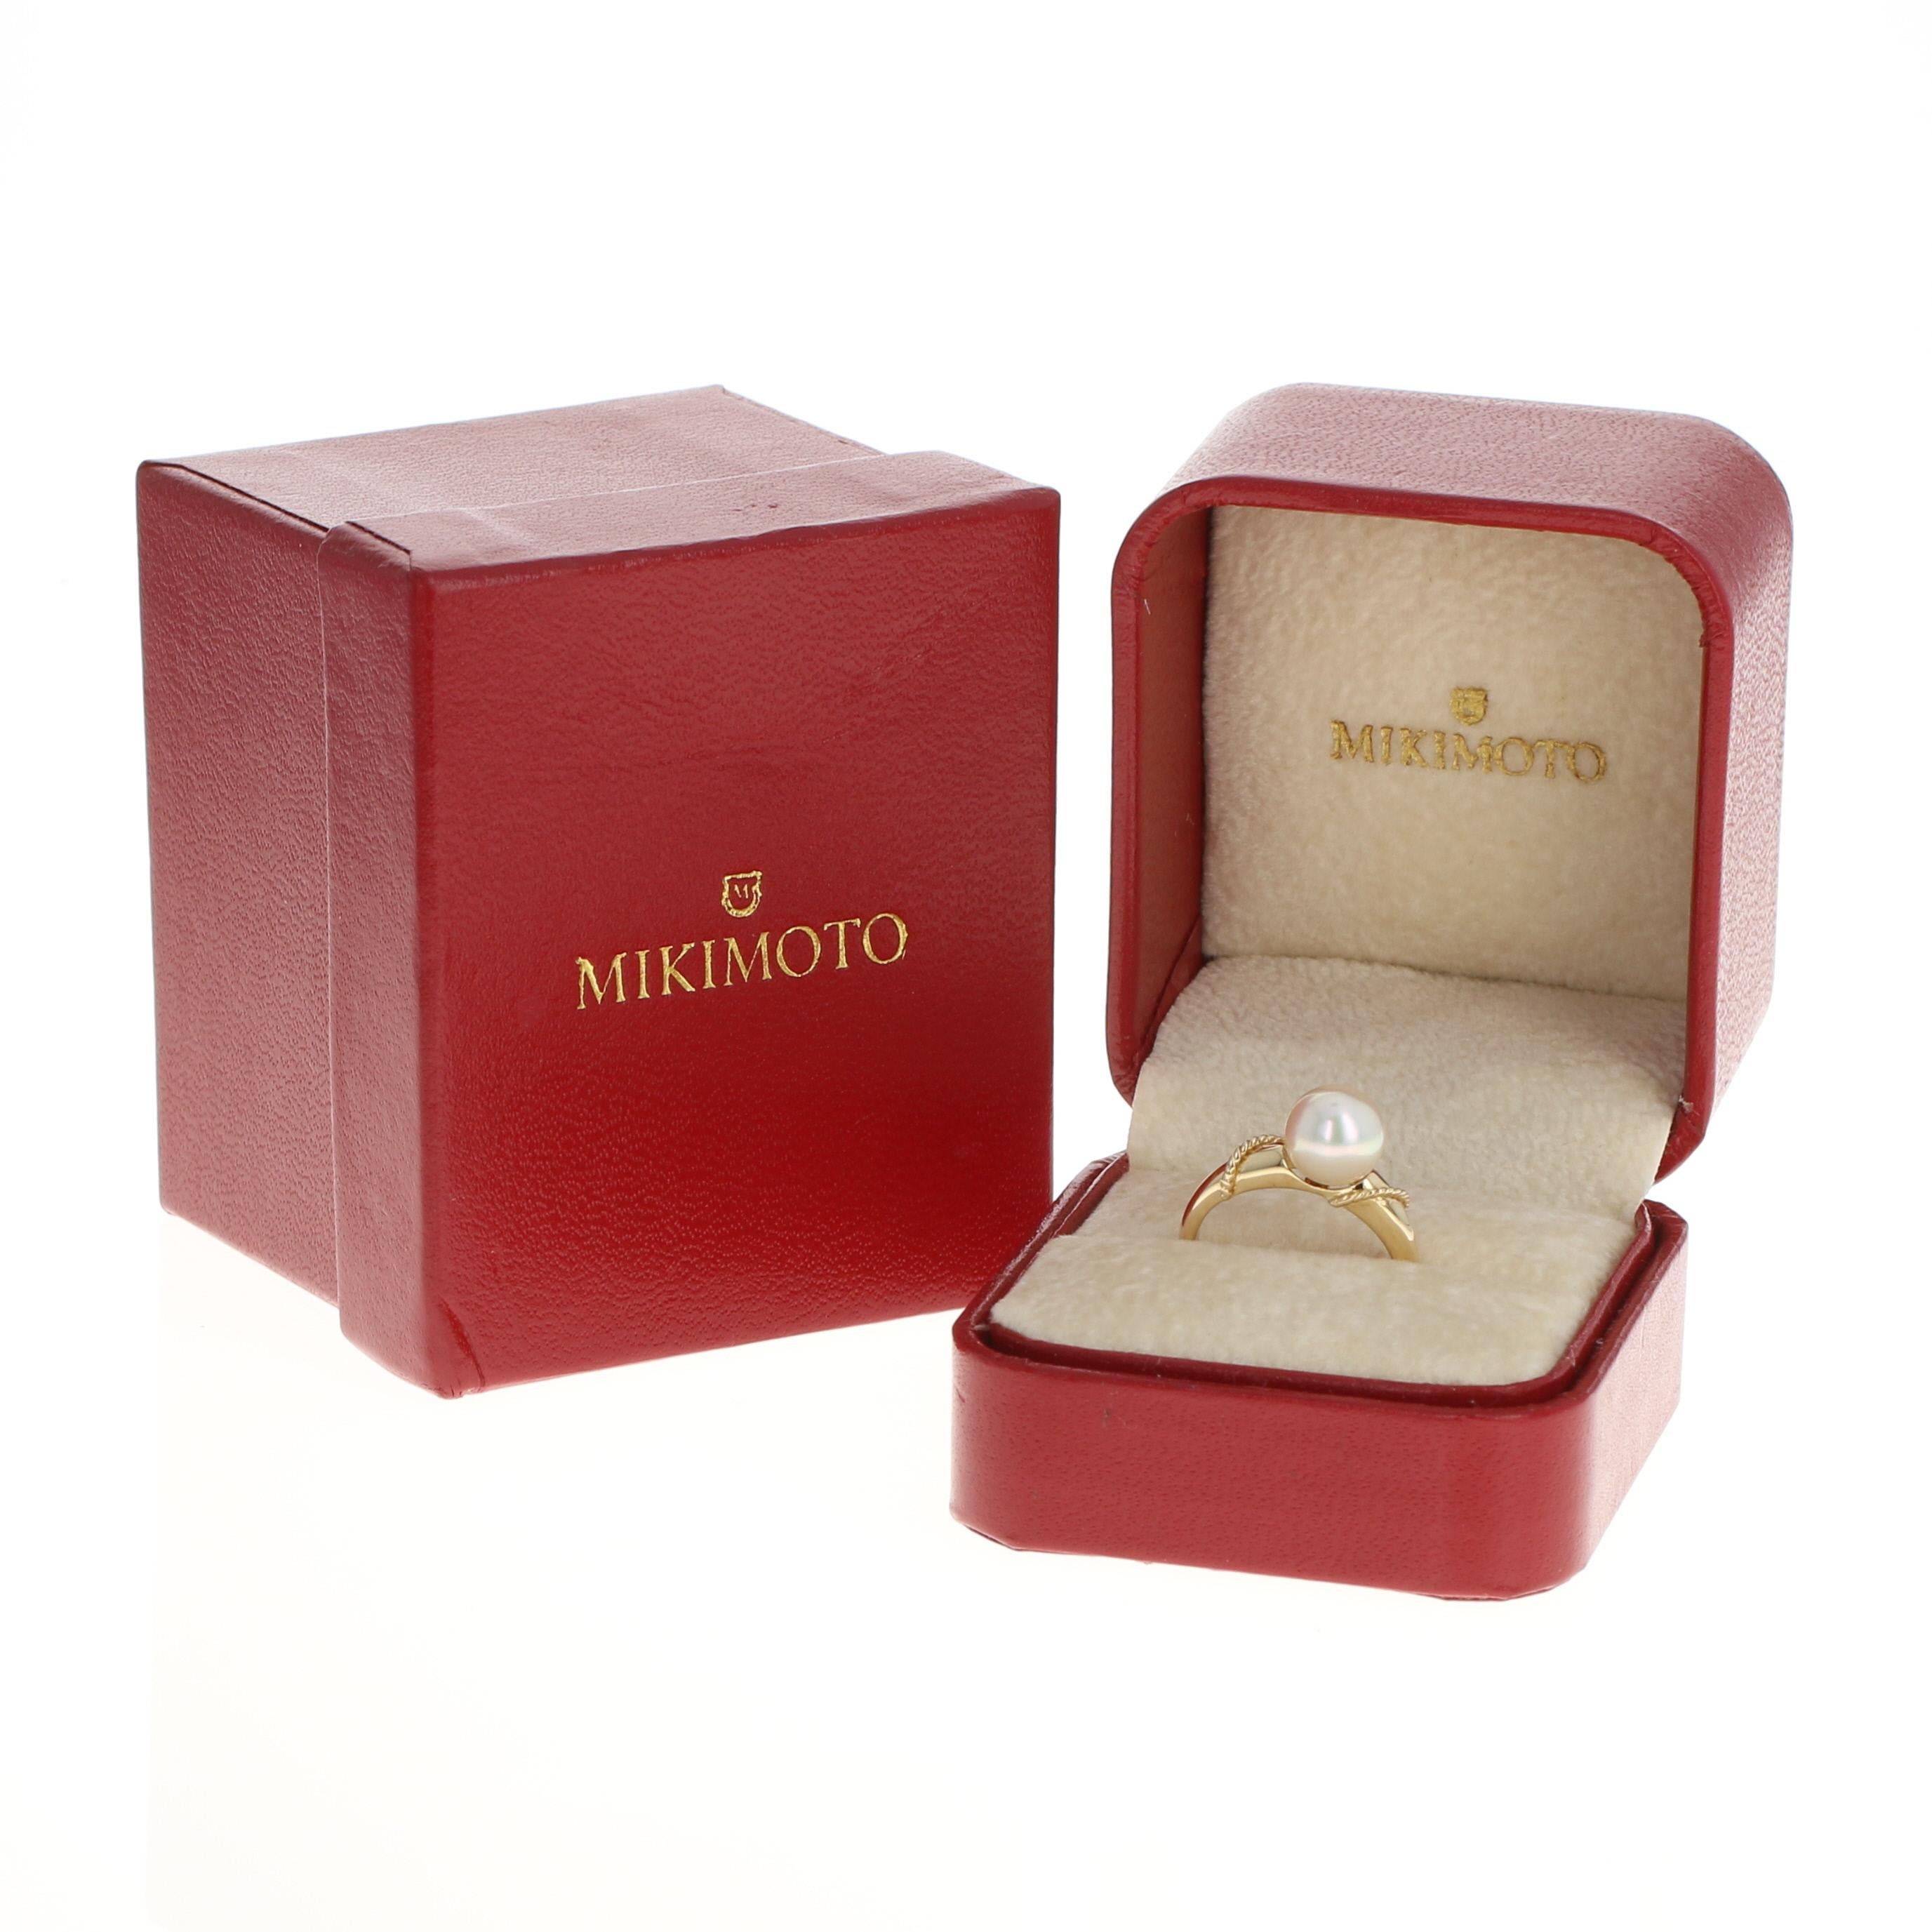 Mikimoto Akoya Pearl Ring Yellow Gold, 18 Karat Solitaire with Boxes 1